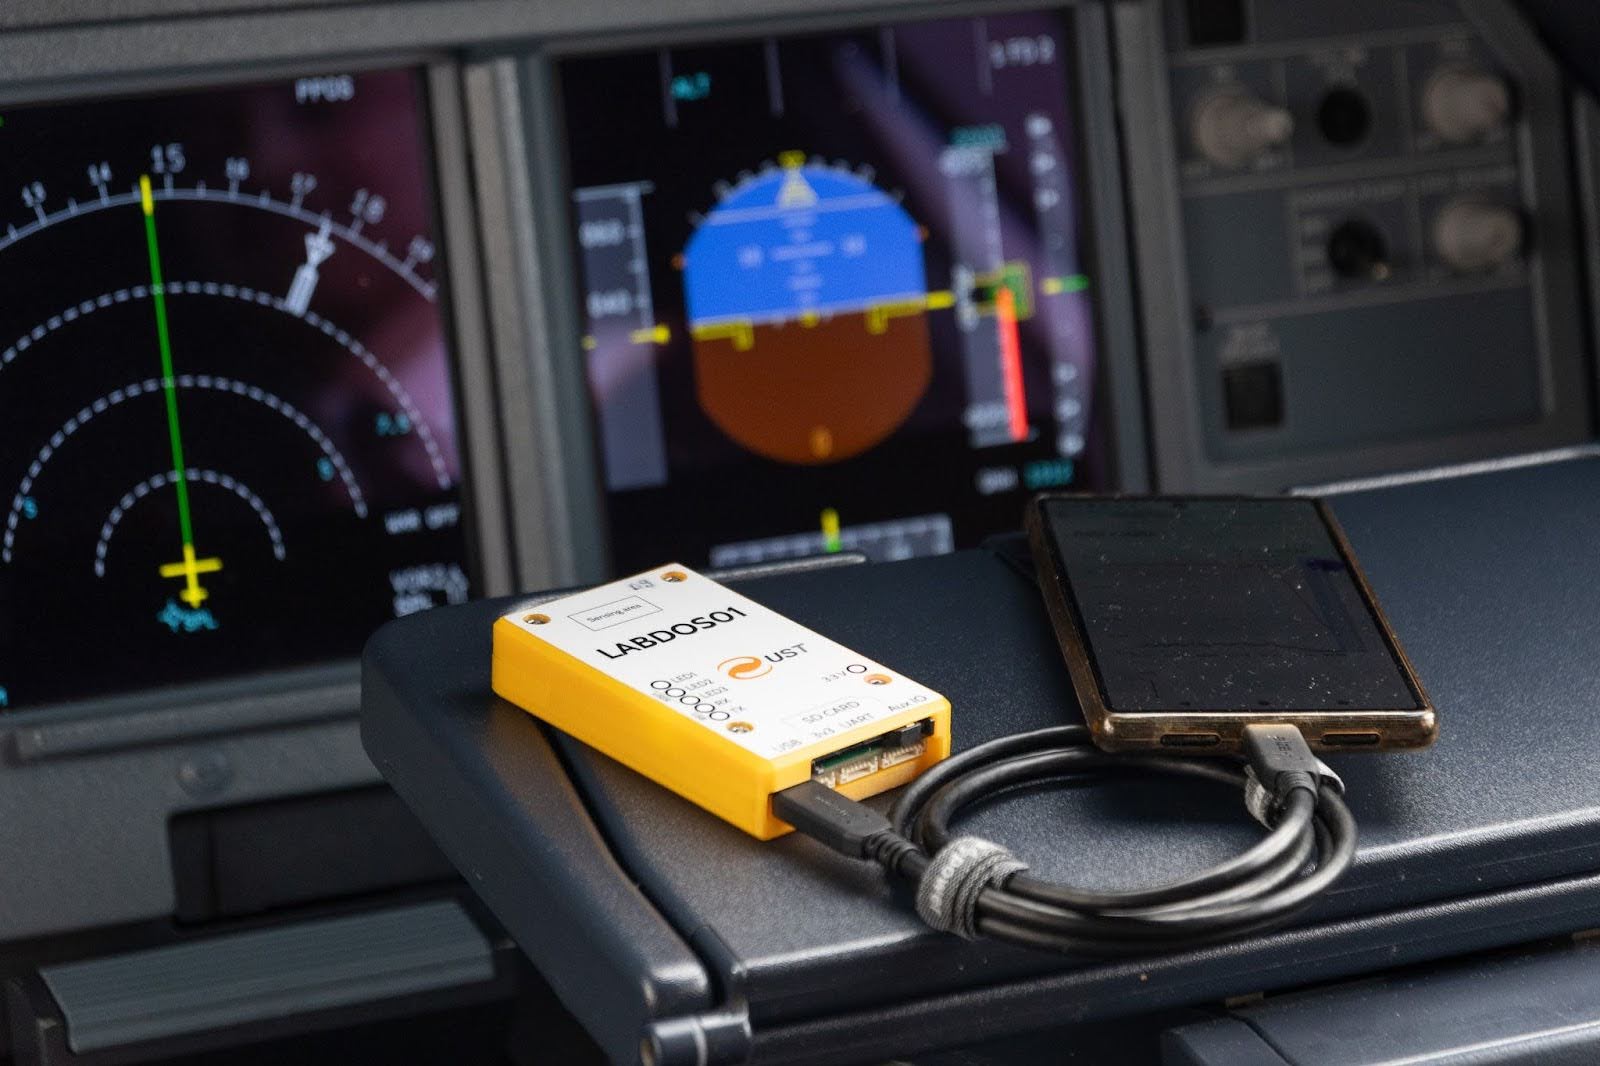 Radiation monitoring in airliner cocpit